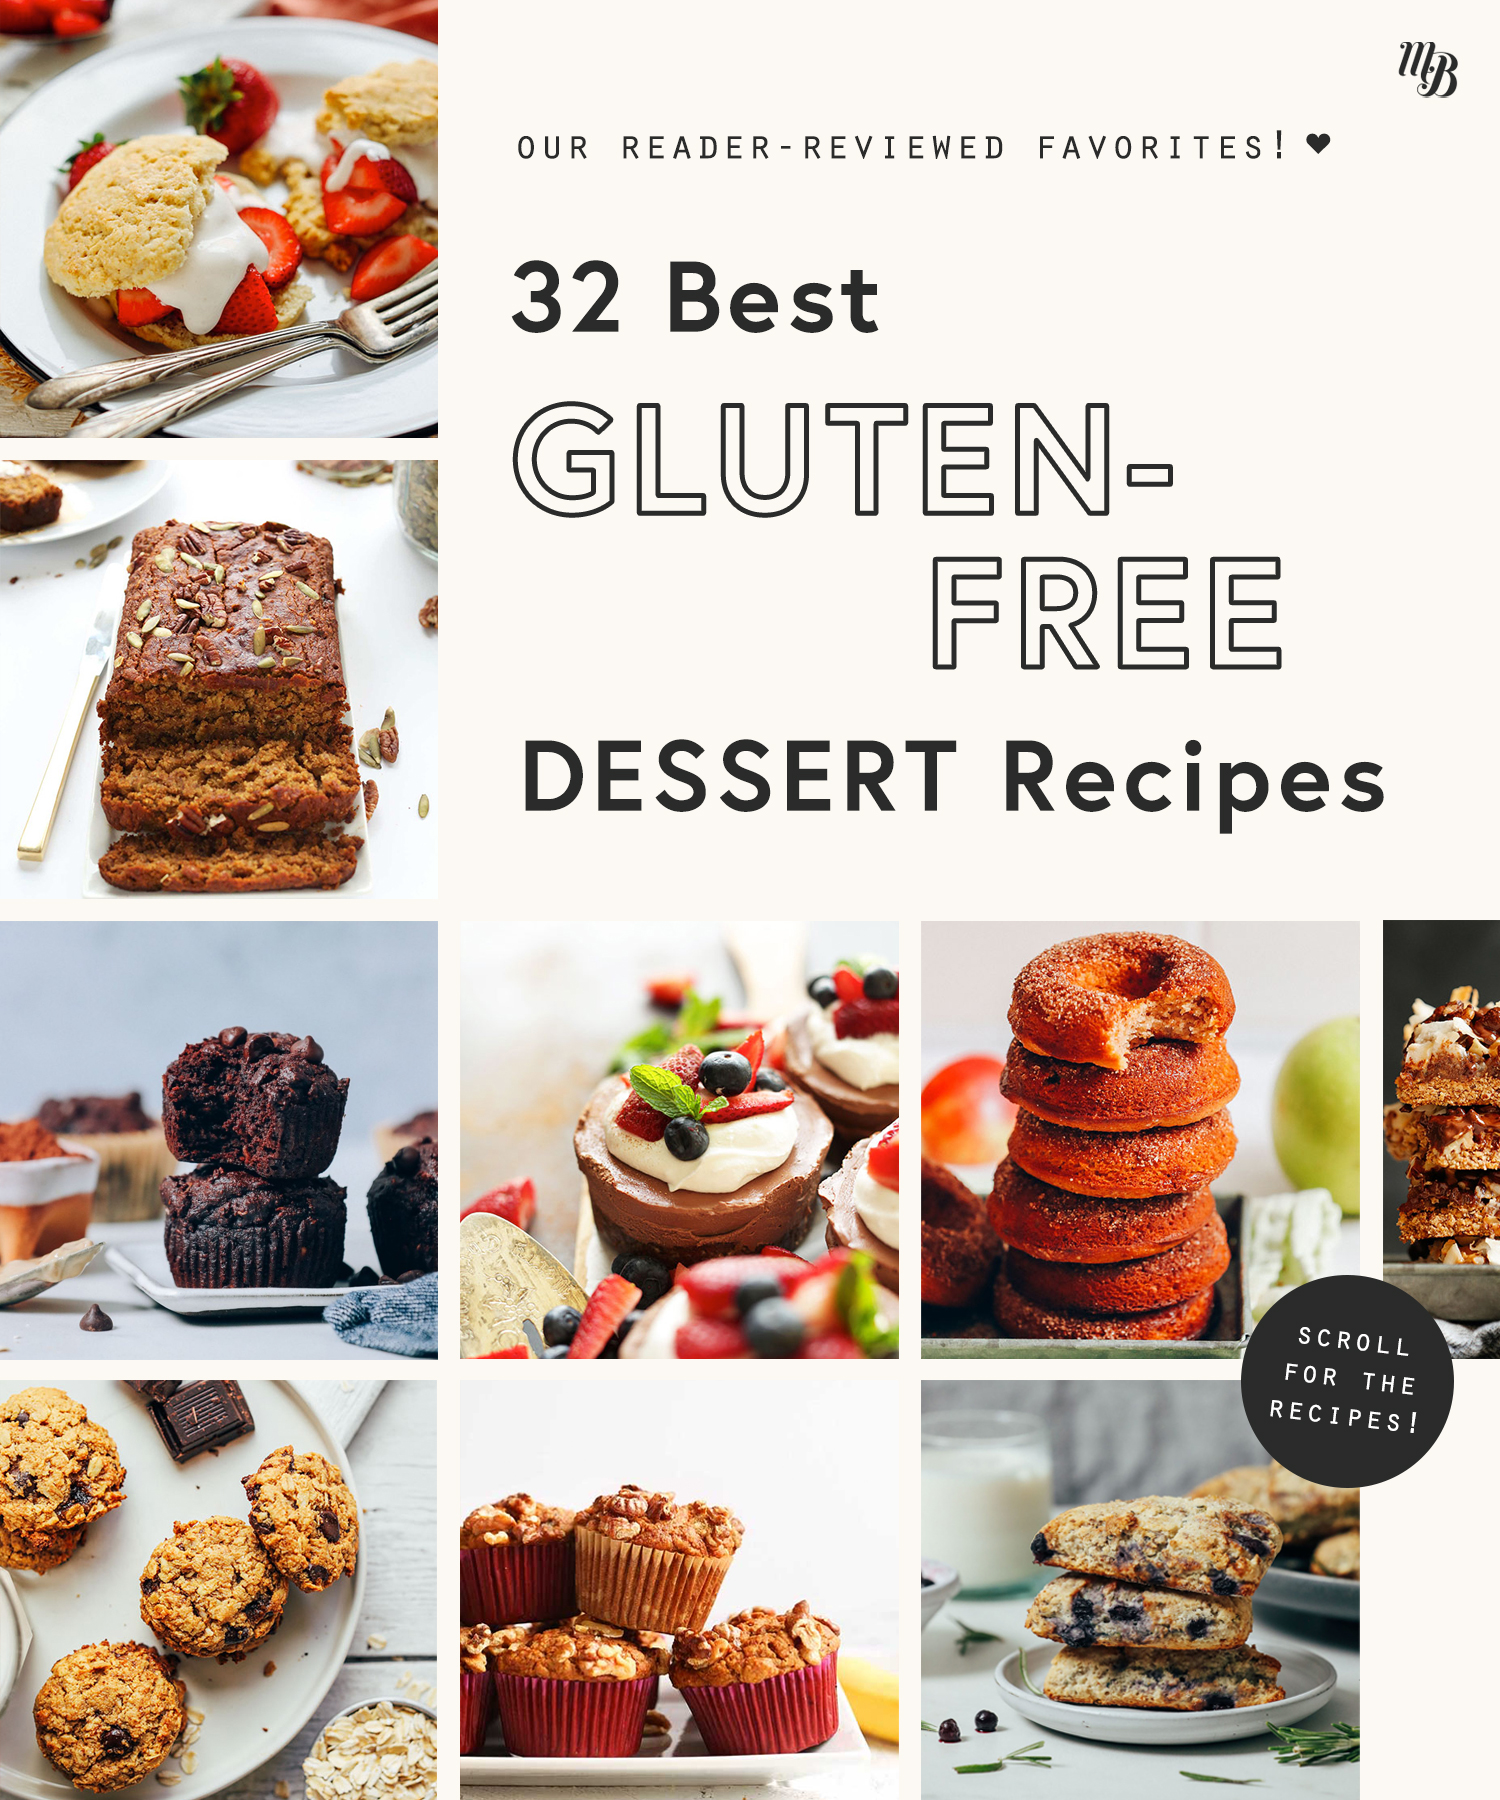 The best gluten-free desserts including strawberry shortcake, pumpkin bread, chocolate cheesecake, and more